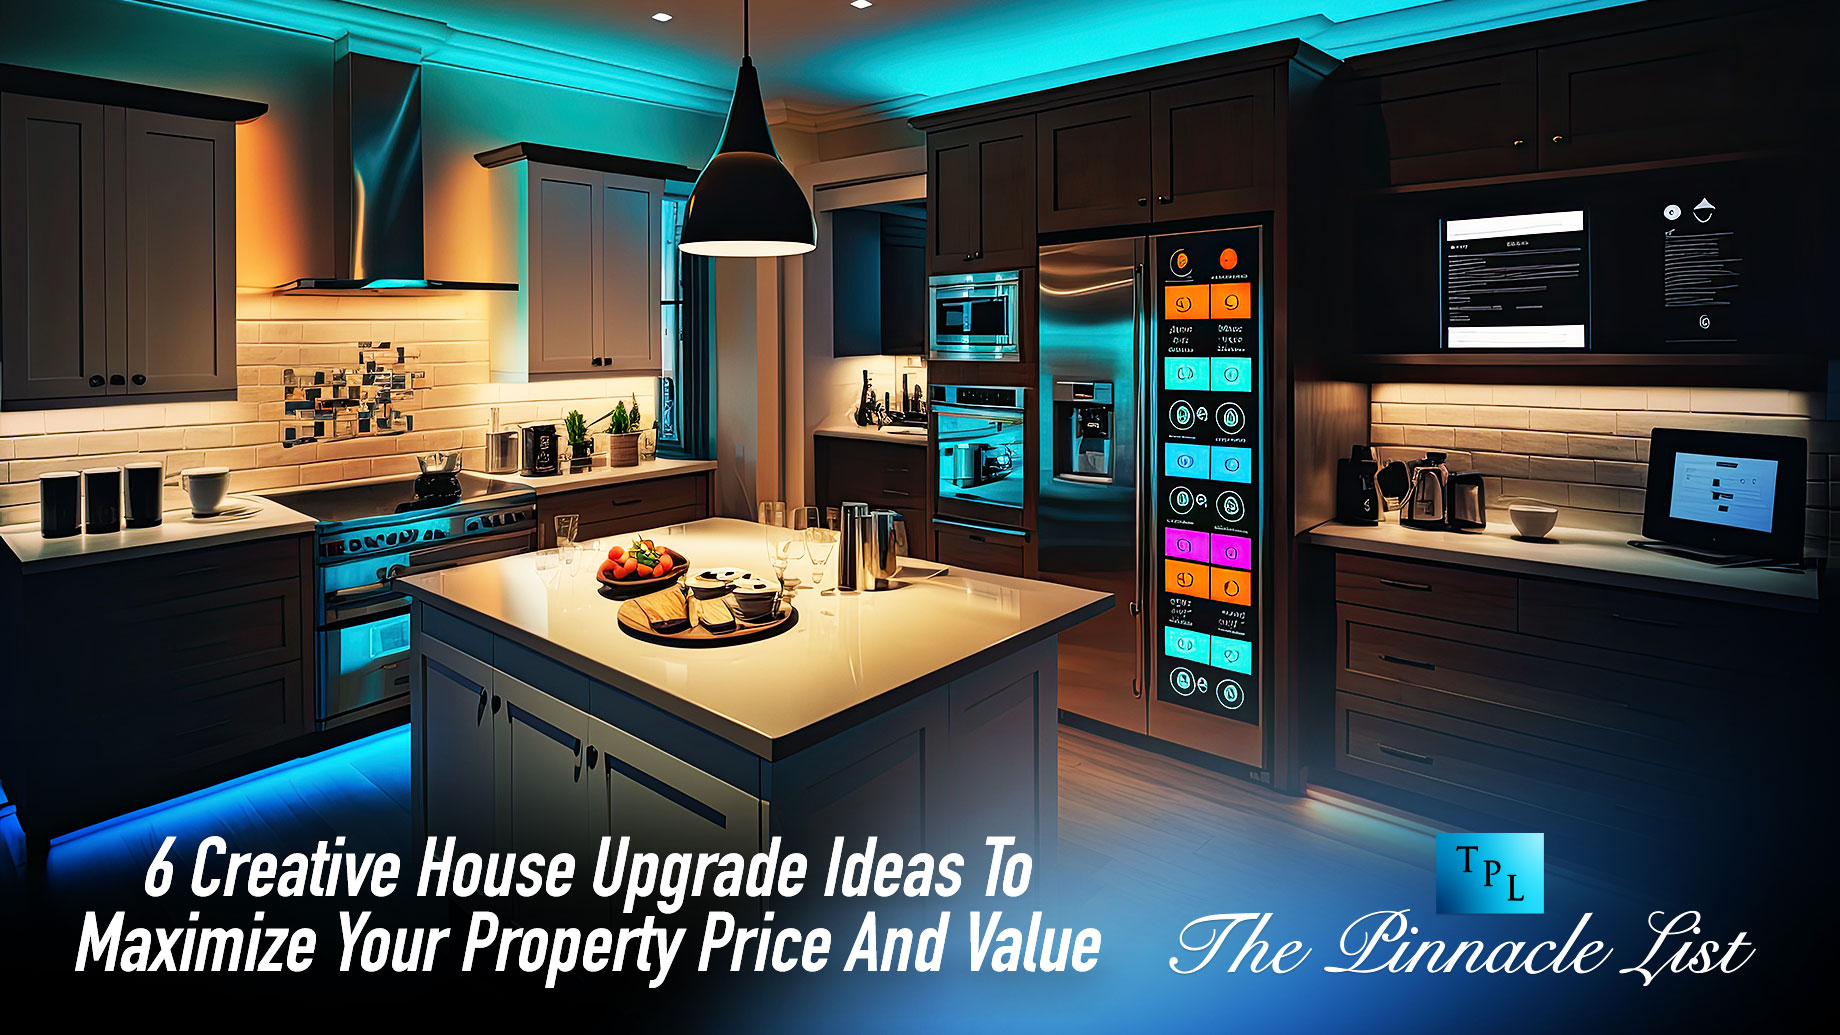 6 Creative House Upgrade Ideas To Maximize Your Property Price And Value